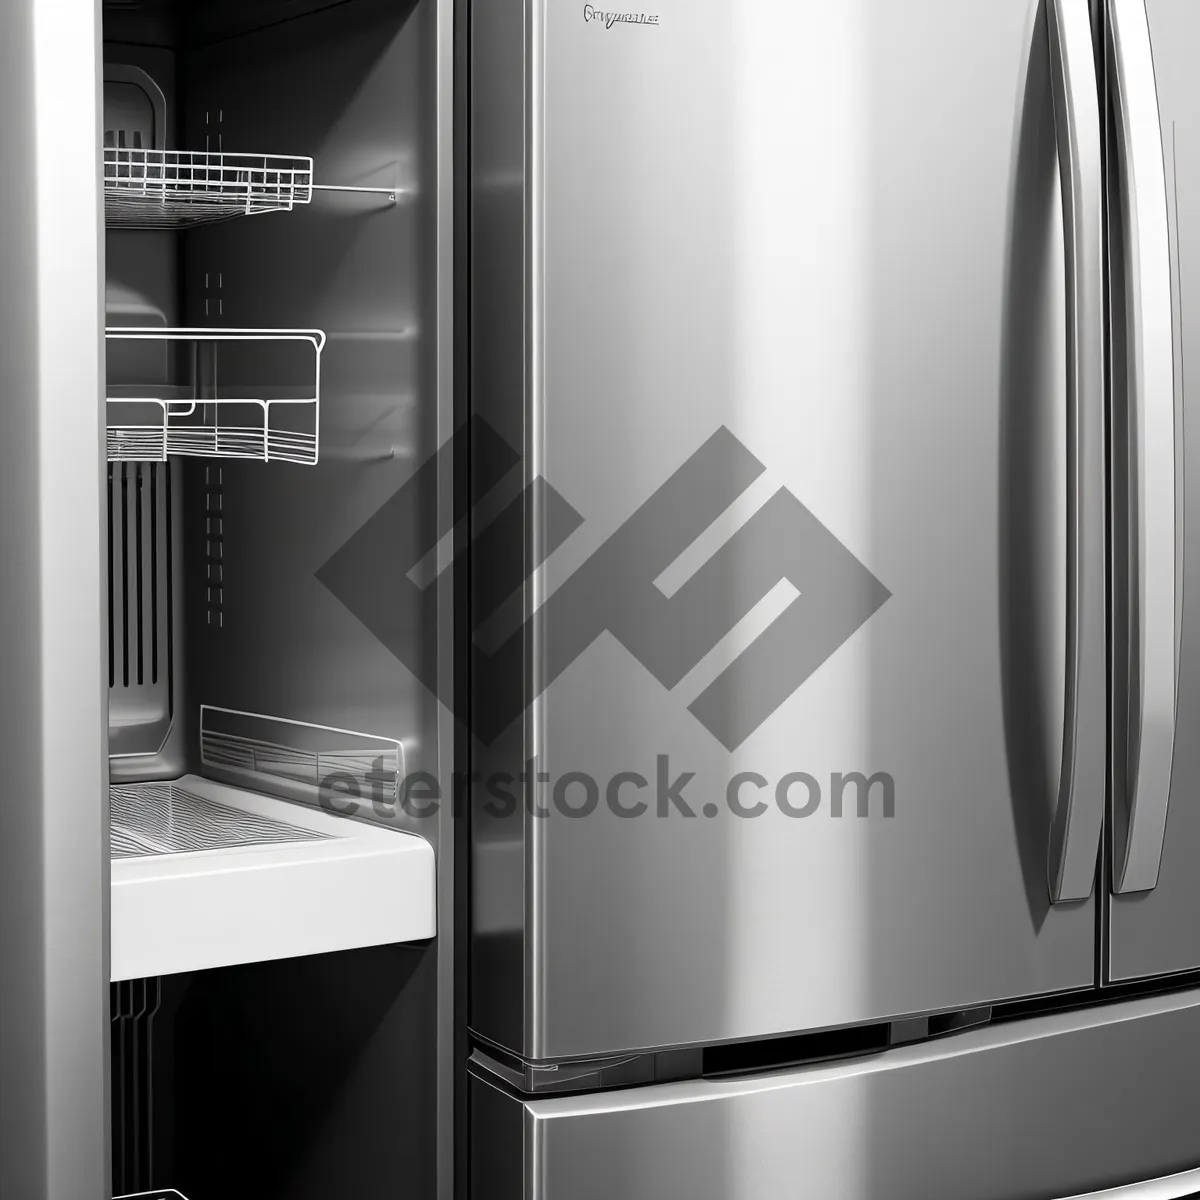 Picture of Modern 3D Refrigerator with Sleek Design